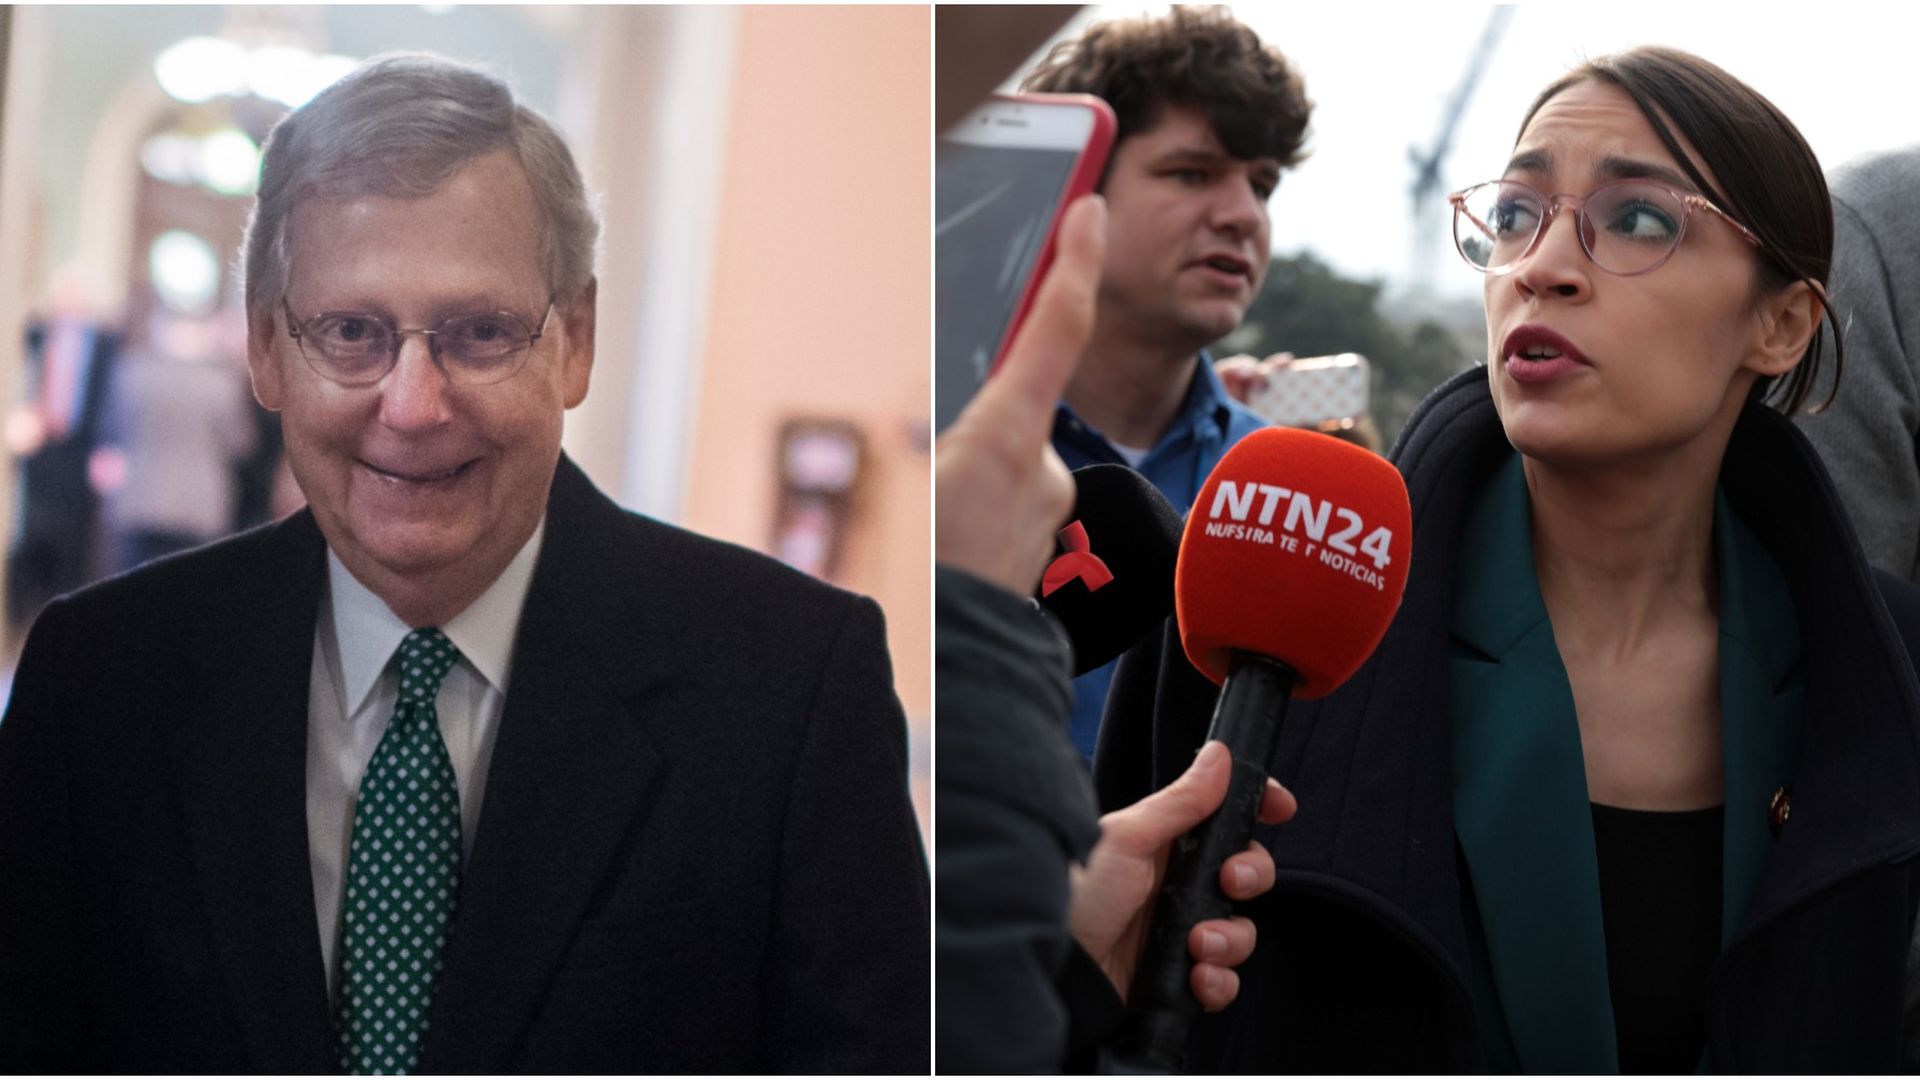 A smiling Mitch McConnell and Alexandria Ocasio-Cortez talking into a microphone